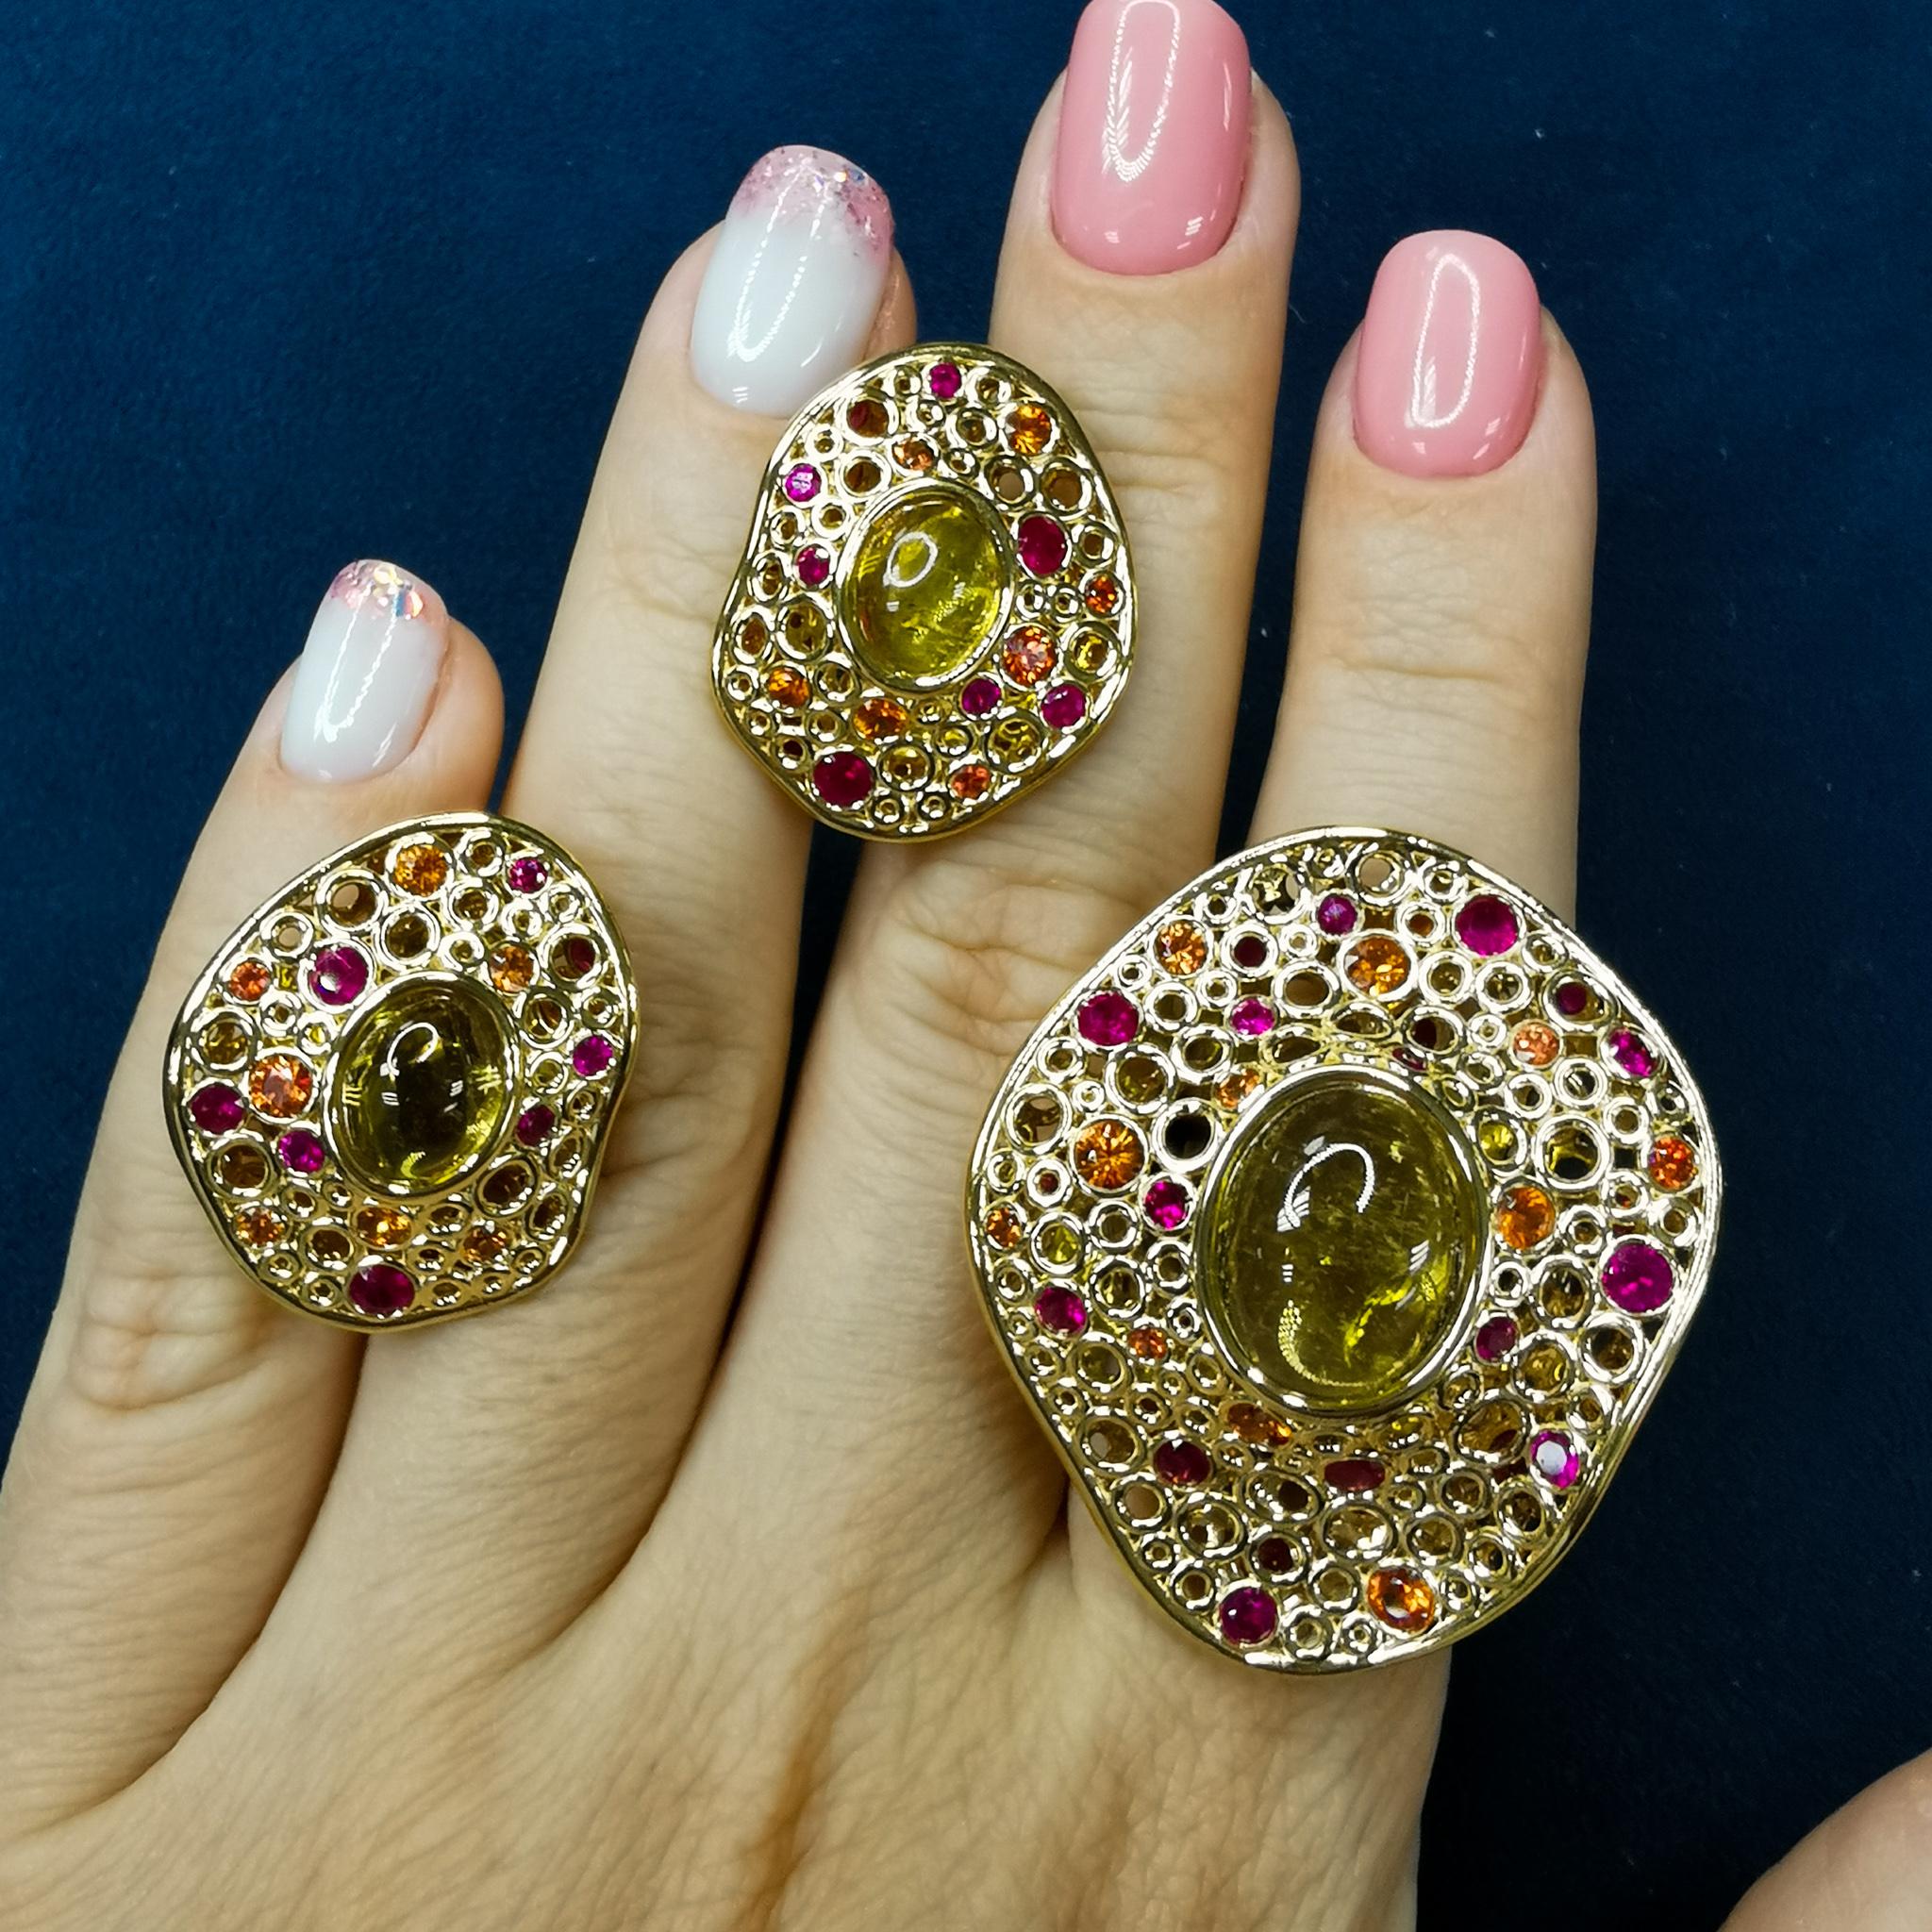 Canary Tourmaline Rubies Sapphires 18 Karat Yellow Gold Bubble Suite
Incredibly light and airy Suite from our Bubbles Collection. Yellow 18 Karat Gold is made in the form of variety of small bubbles, some of which have Orange Sapphires and Rubies